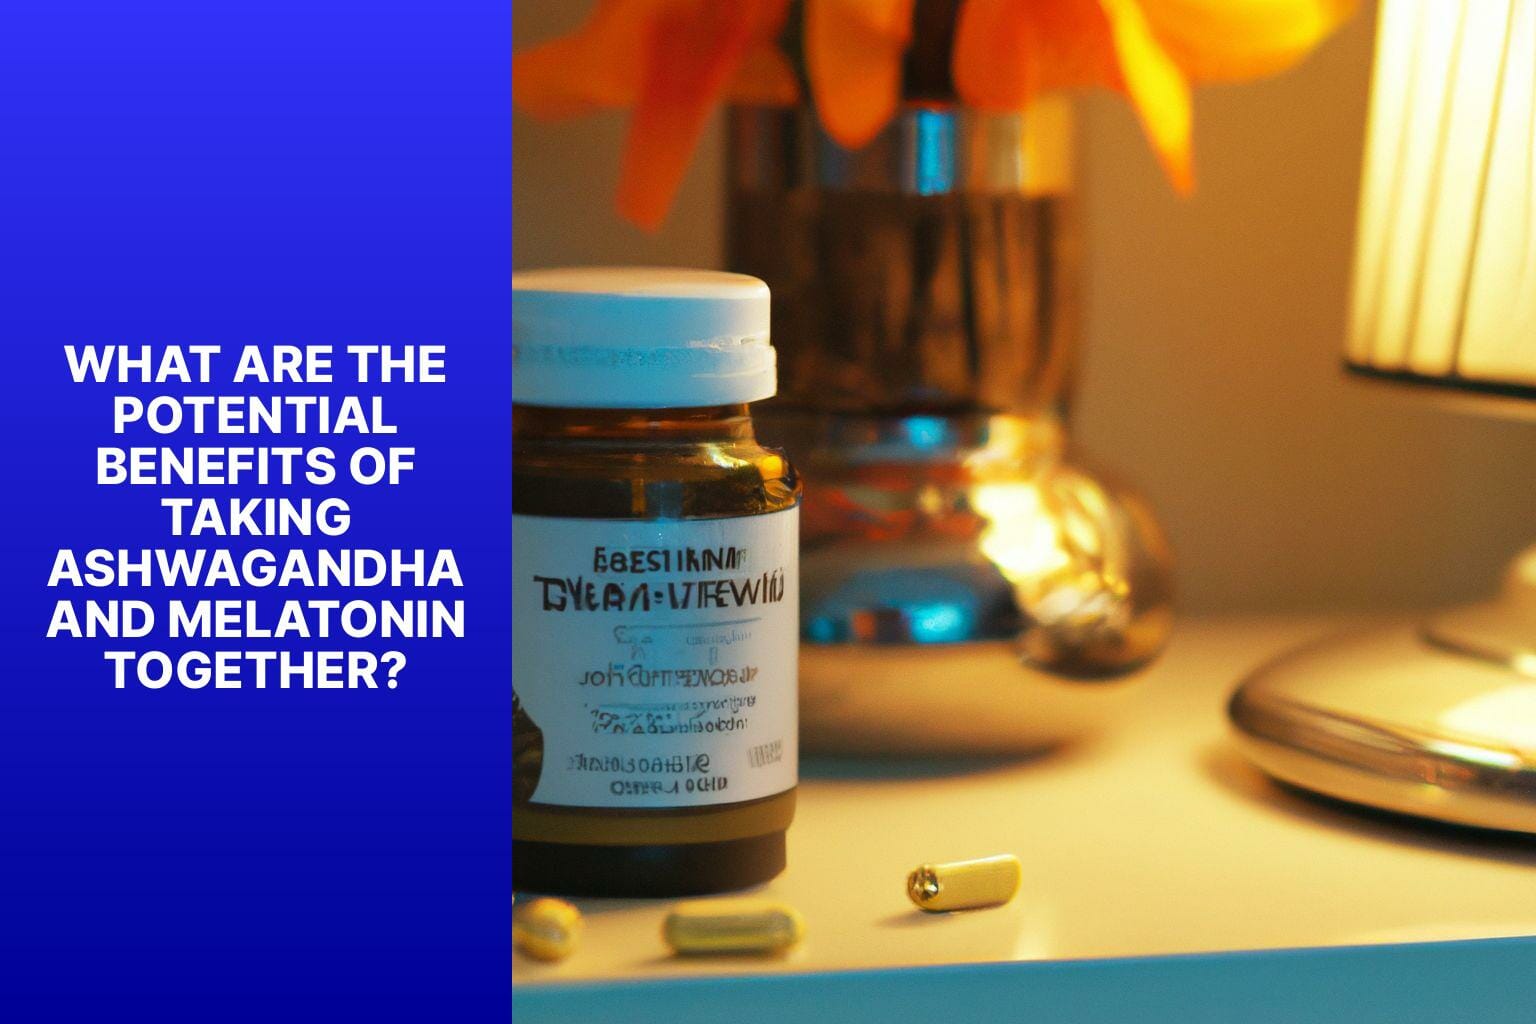 What Are the Potential Benefits of Taking Ashwagandha and Melatonin Together? - Can You Take Ashwagandha and Melatonin Together? 